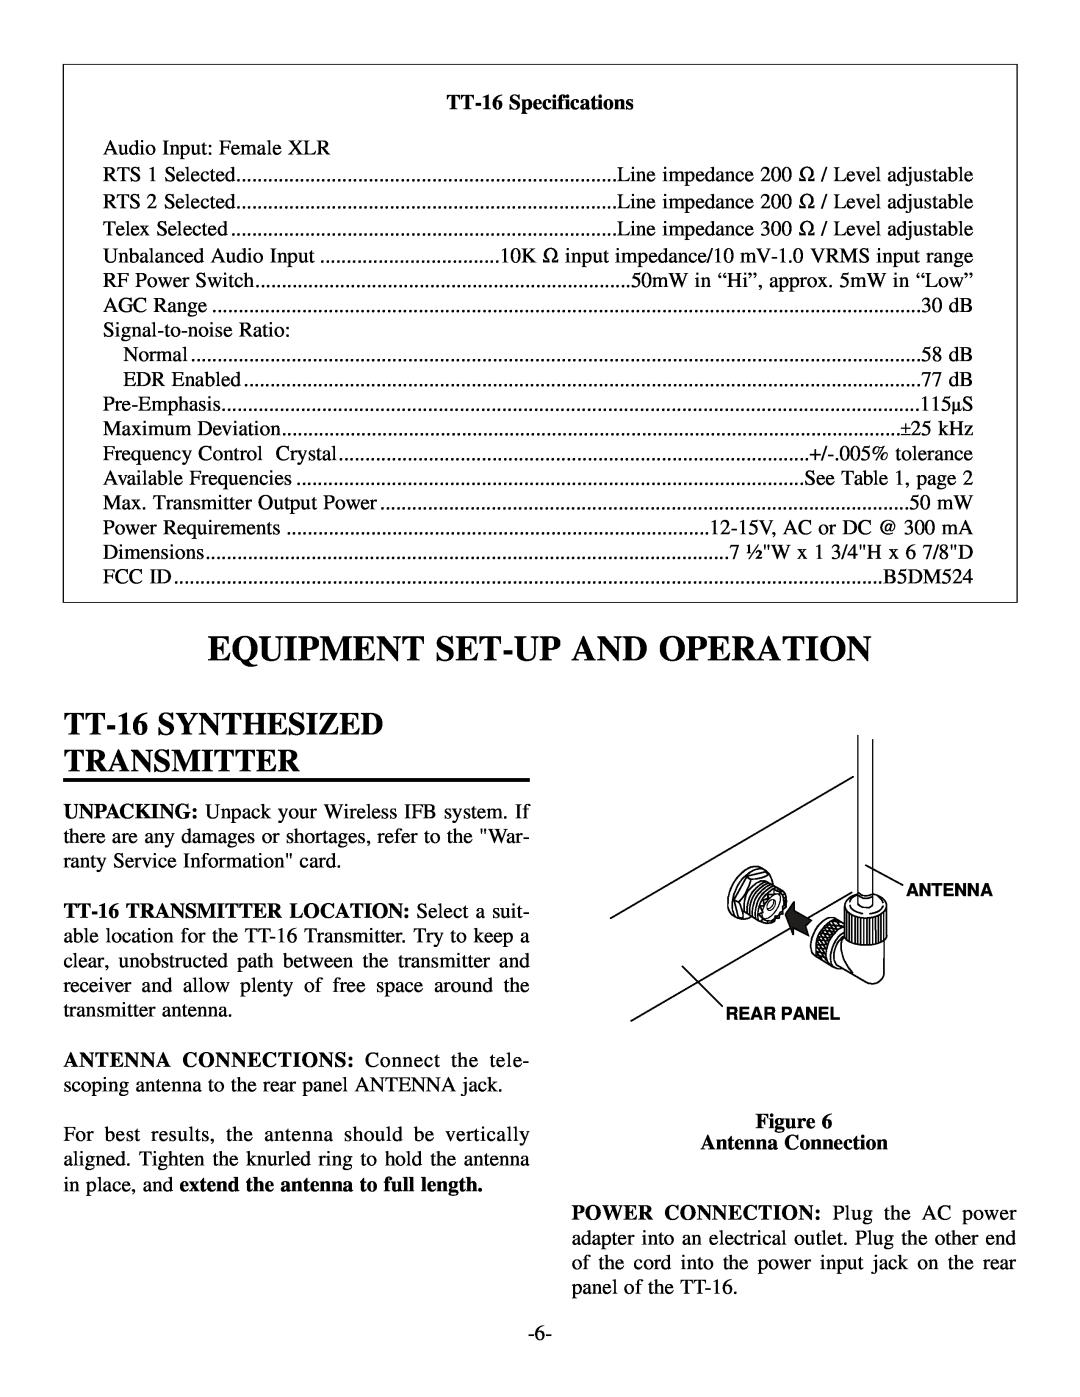 Telex TR-16 Equipment Set-Upand Operation, TT-16SYNTHESIZED TRANSMITTER, TT-16Specifications, Figure Antenna Connection 